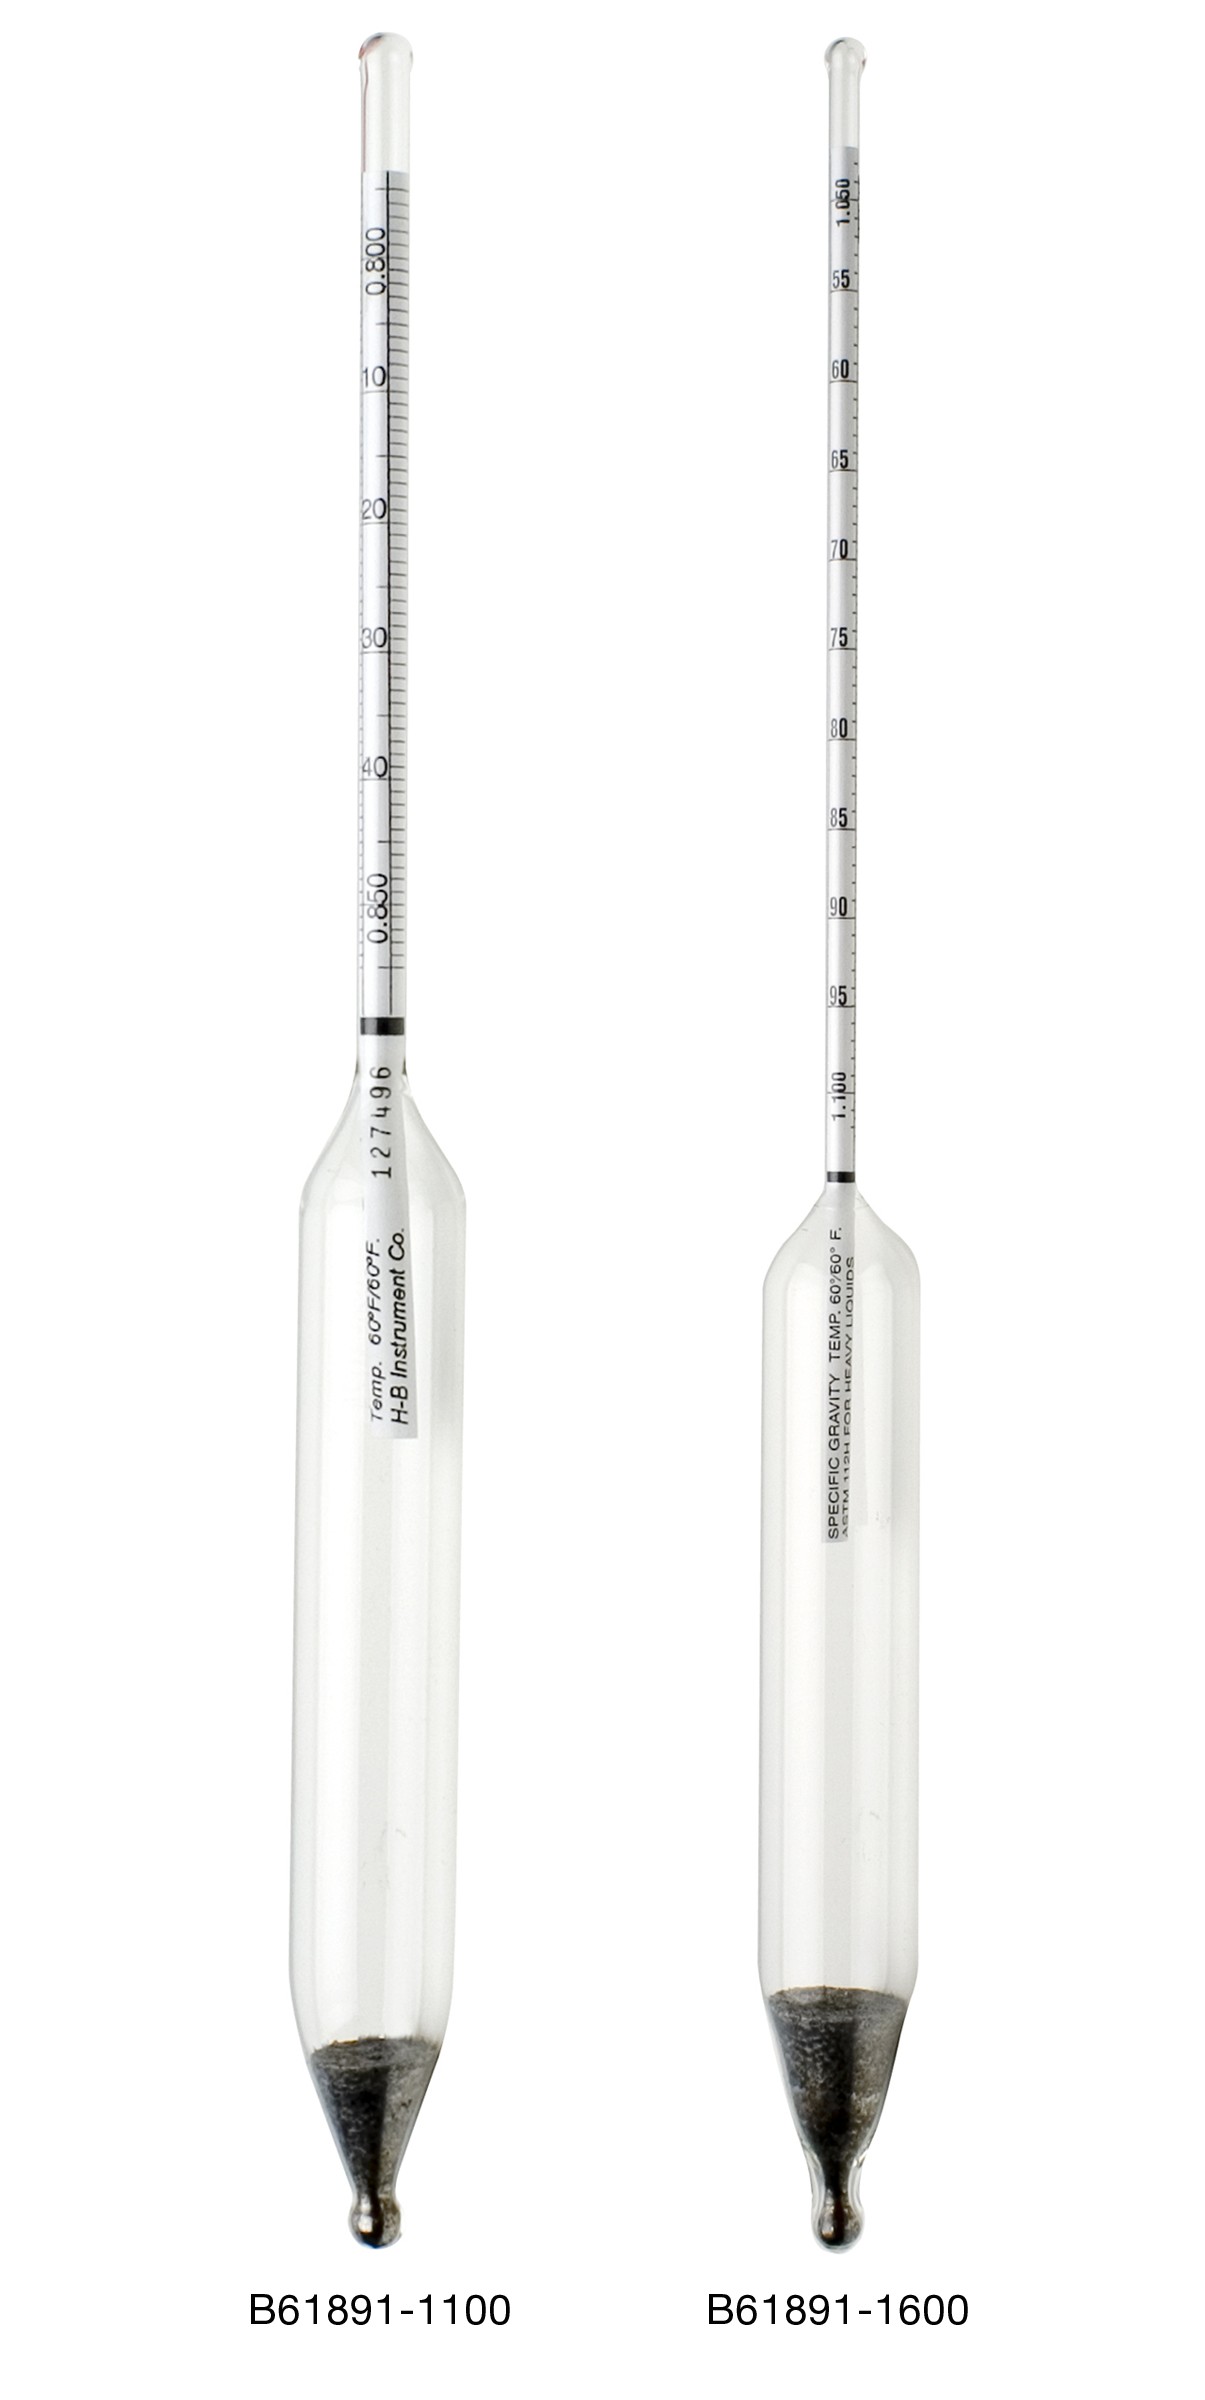 H-B DURAC Specific Gravity ASTM Hydrometers; Traceable to NIST